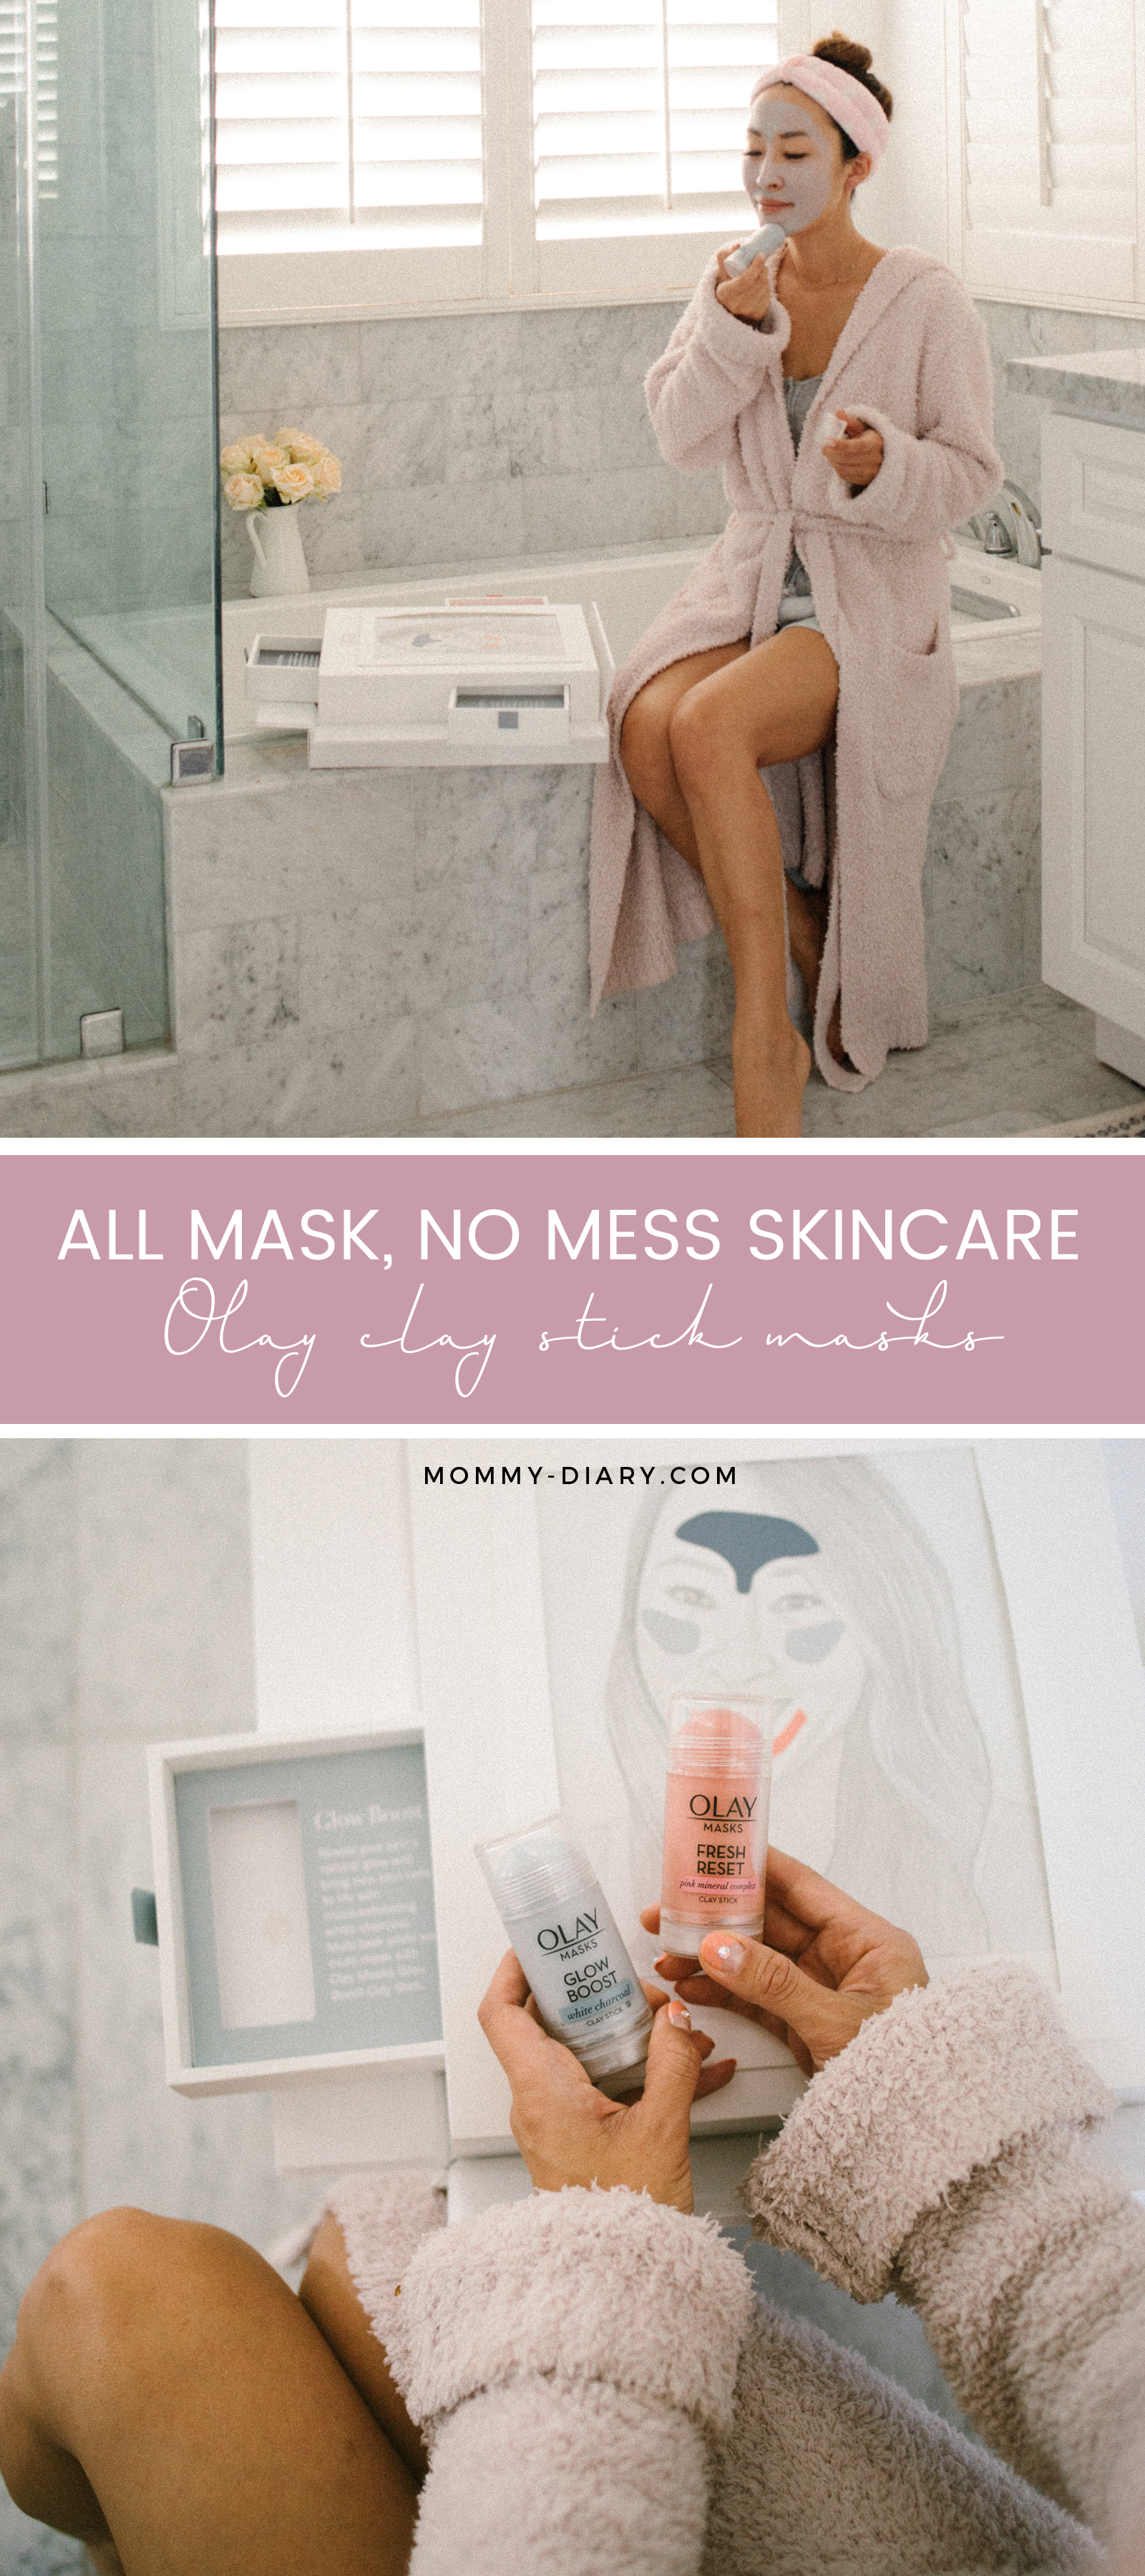 Olay Clay Stick Mask: All Mask, No Mess Skincare